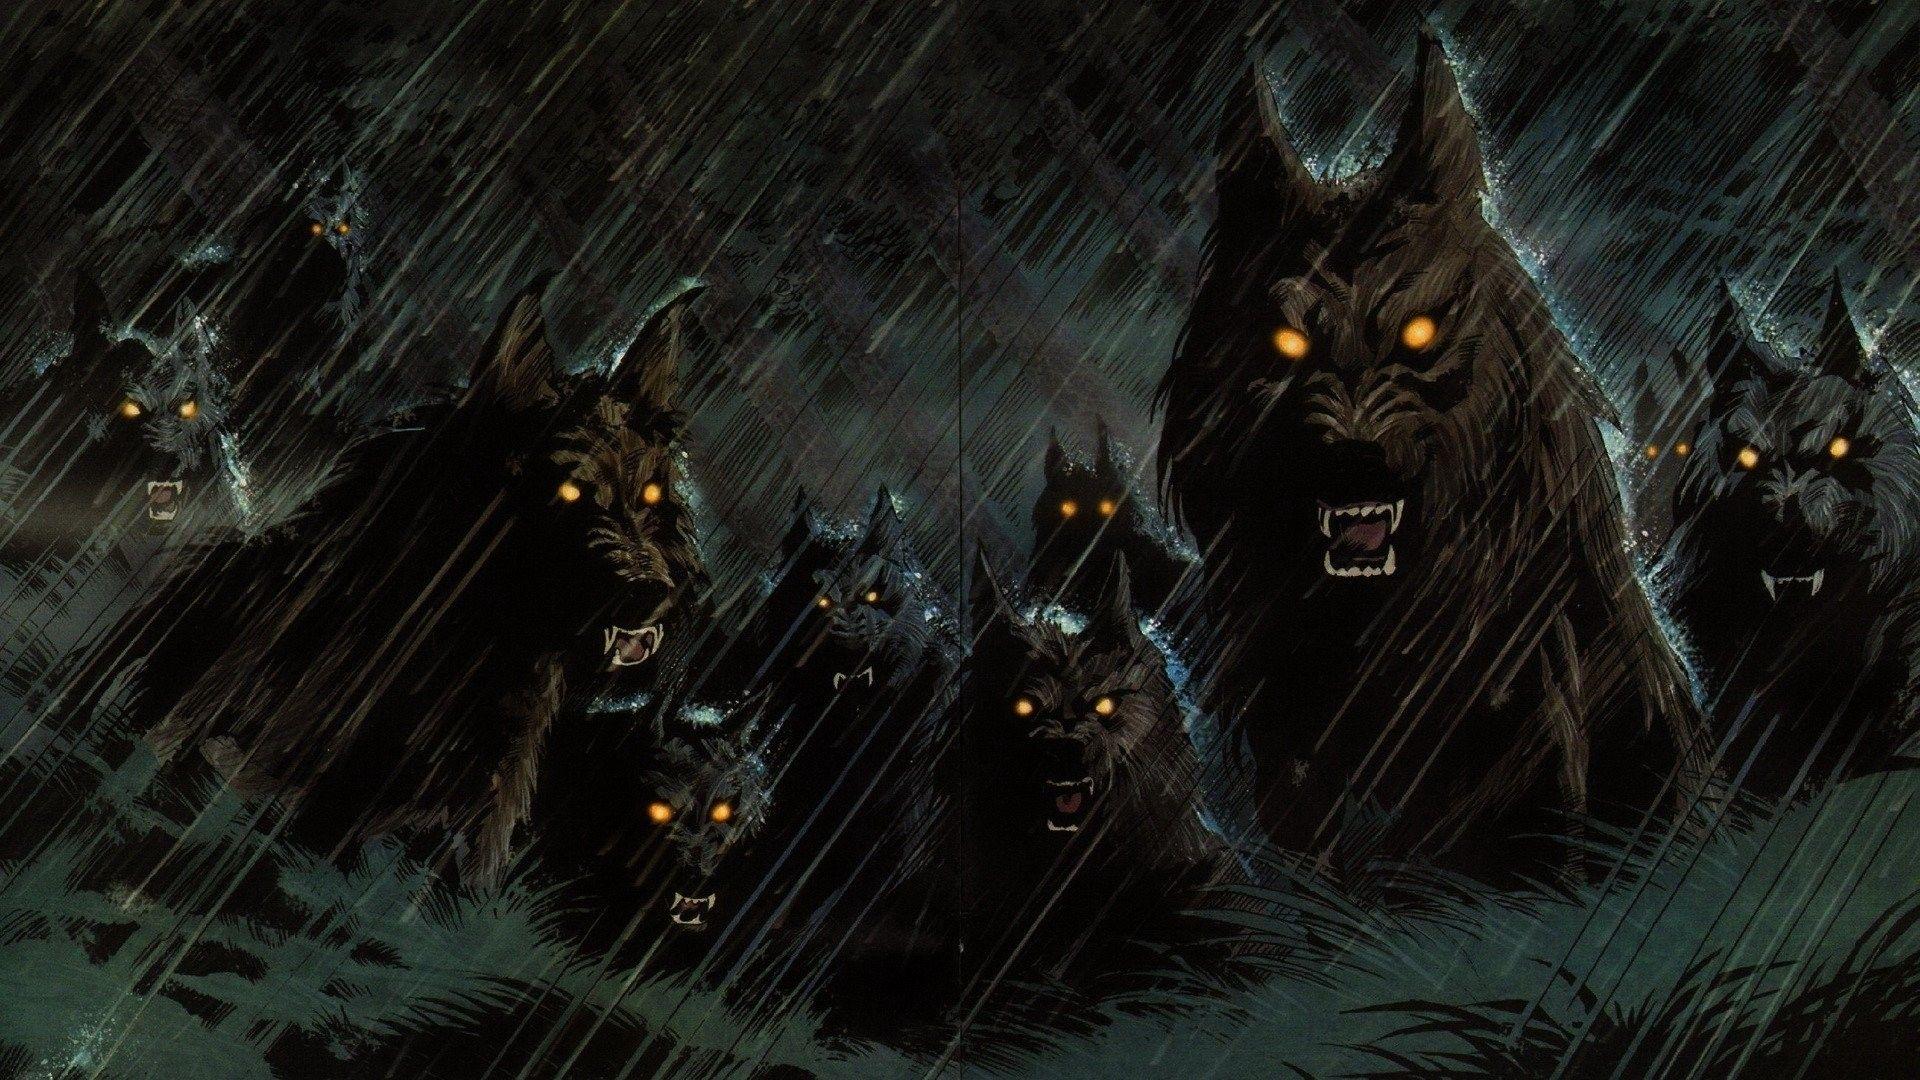 Werewolf Image and Wallpapers